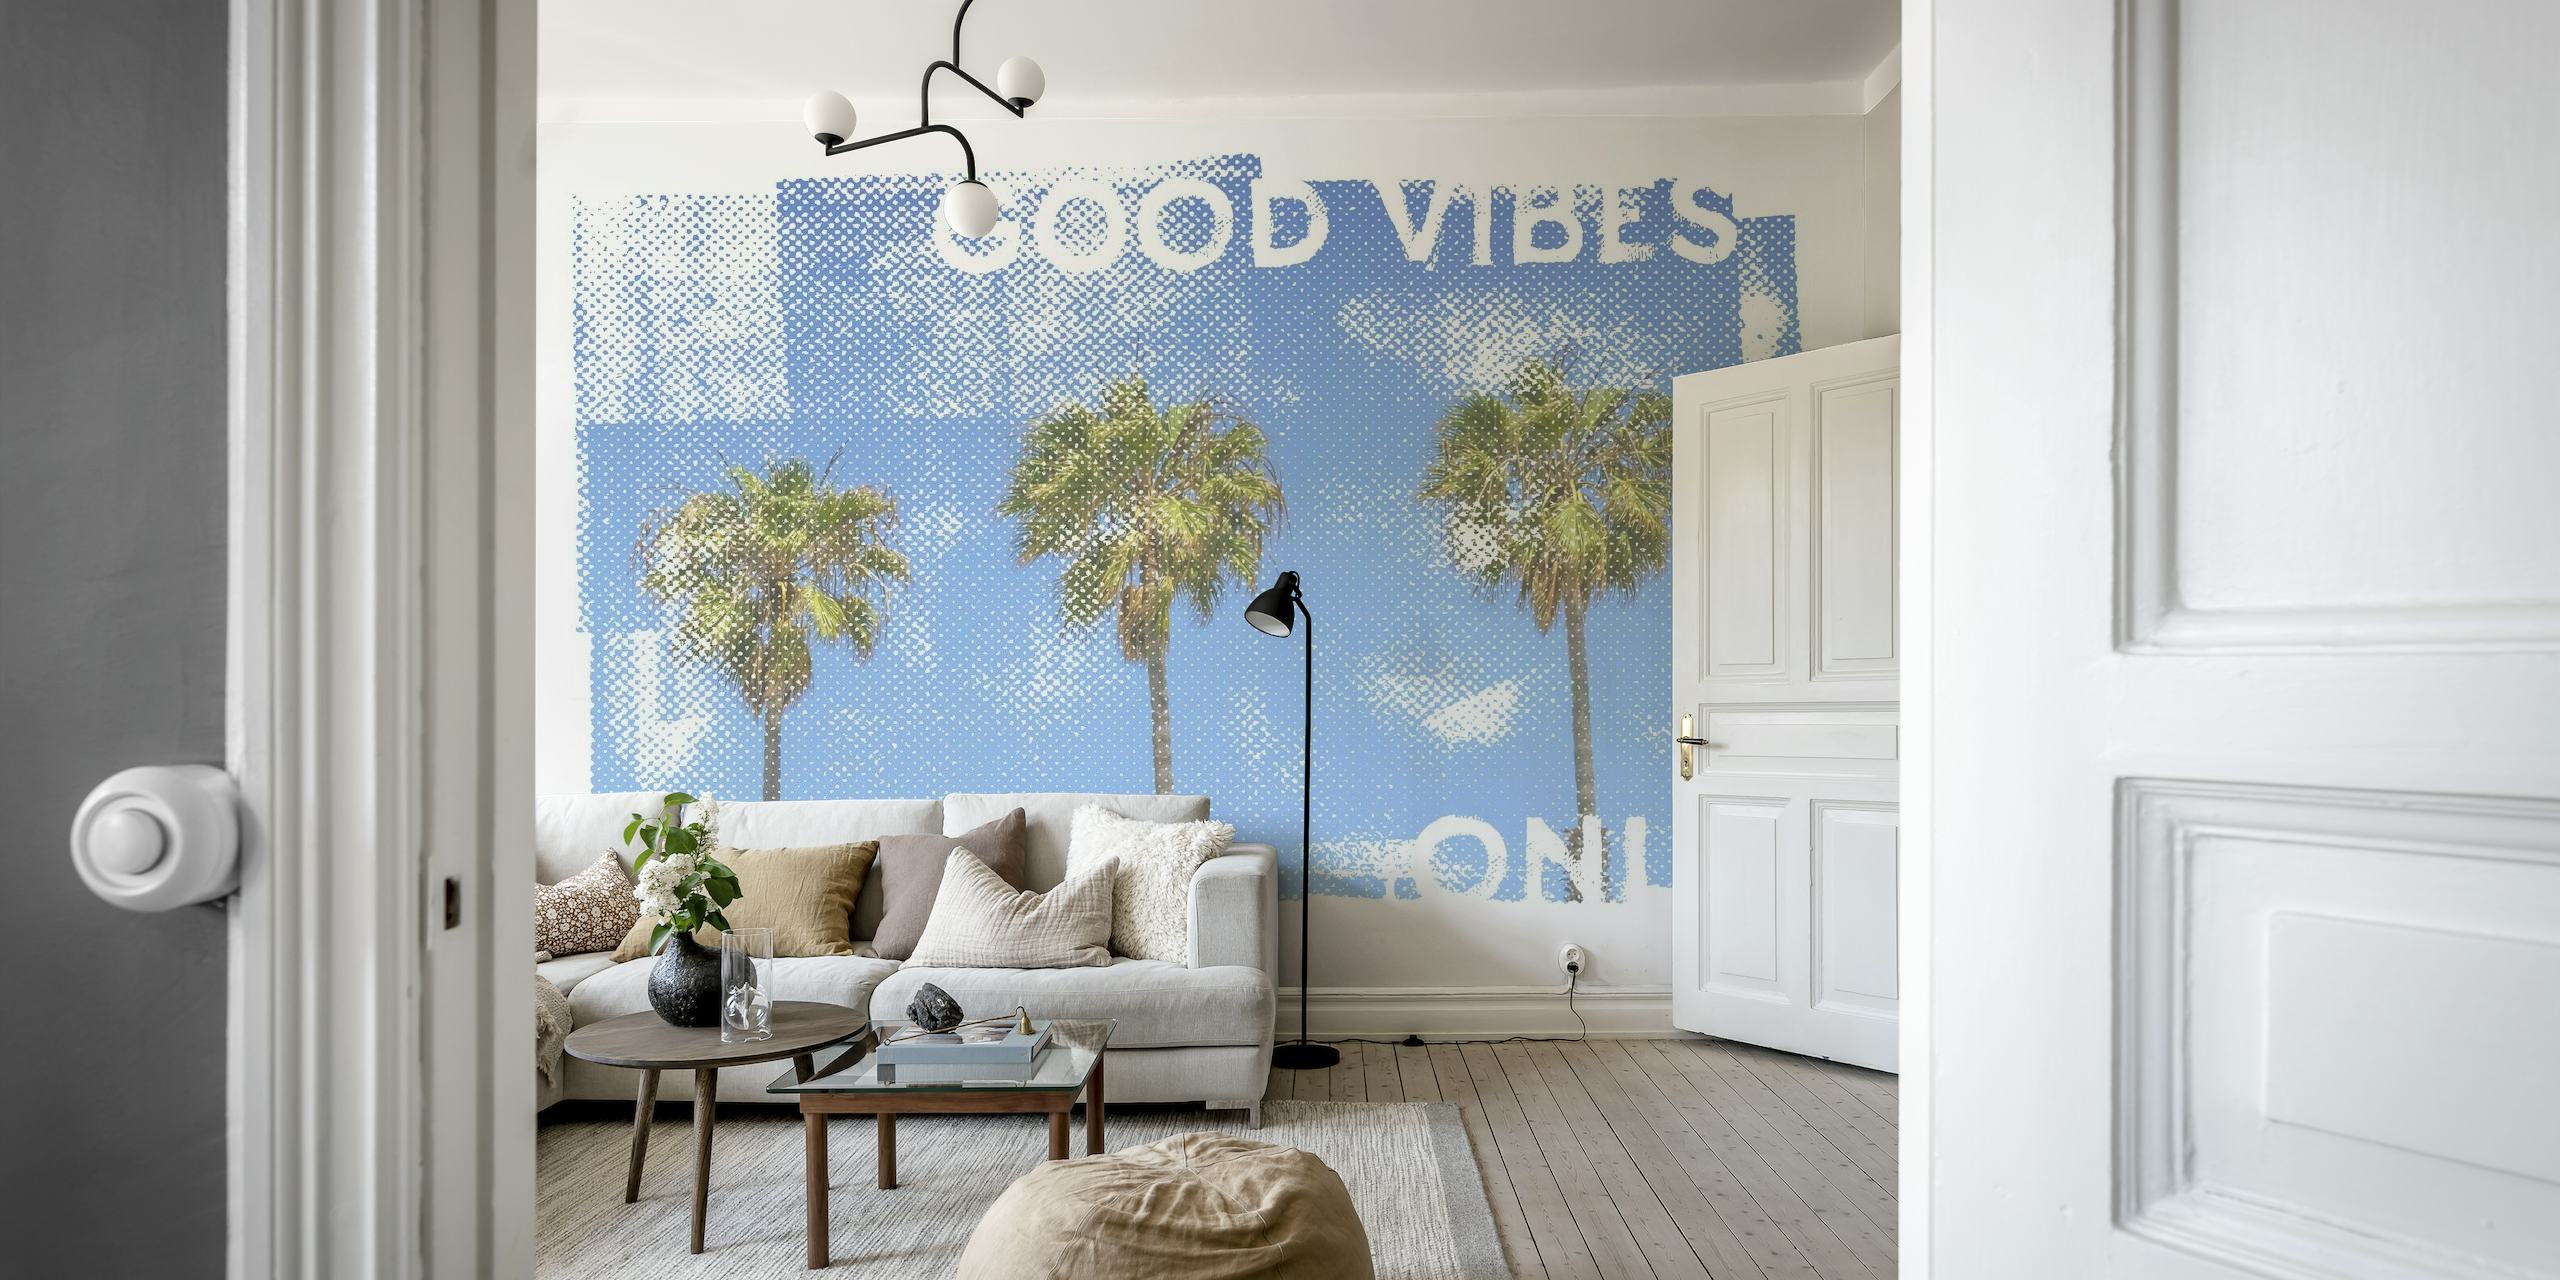 Palm trees - good vibes only papel pintado